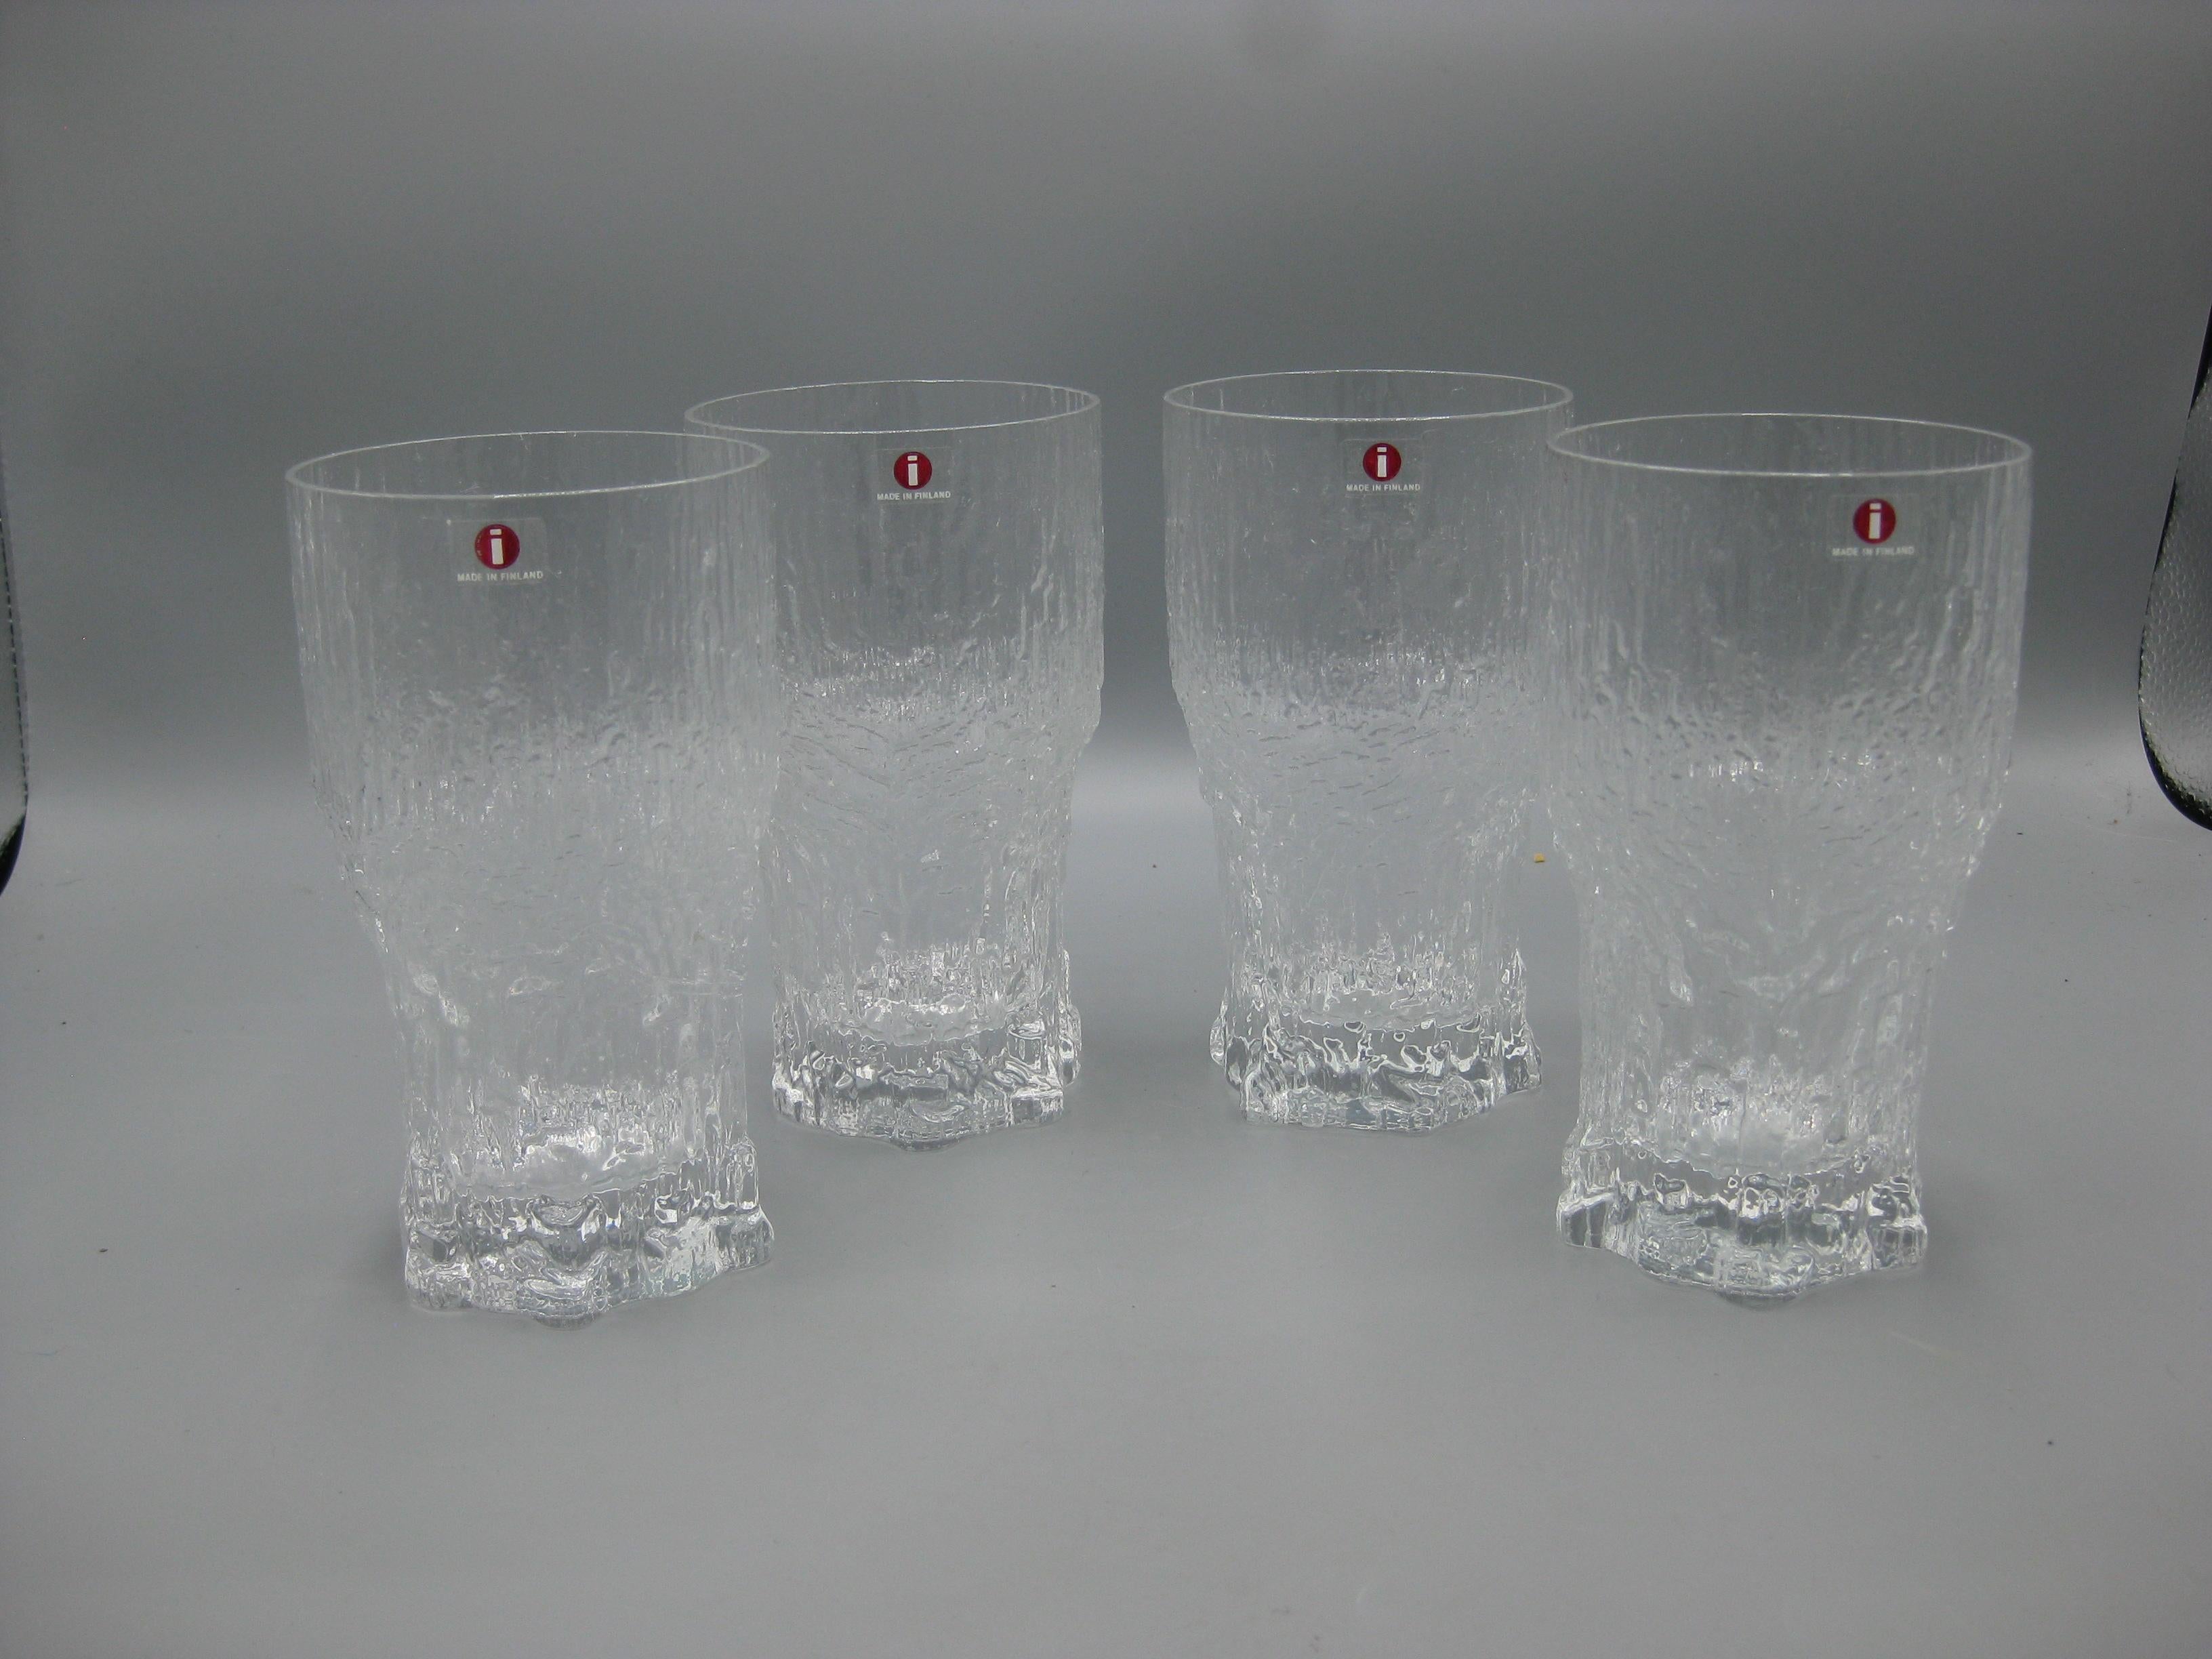 4 Iittala of Finland Aslak Tapio Wirkkala Beer Glasses New in Box 60's VW Promo In Excellent Condition For Sale In San Diego, CA